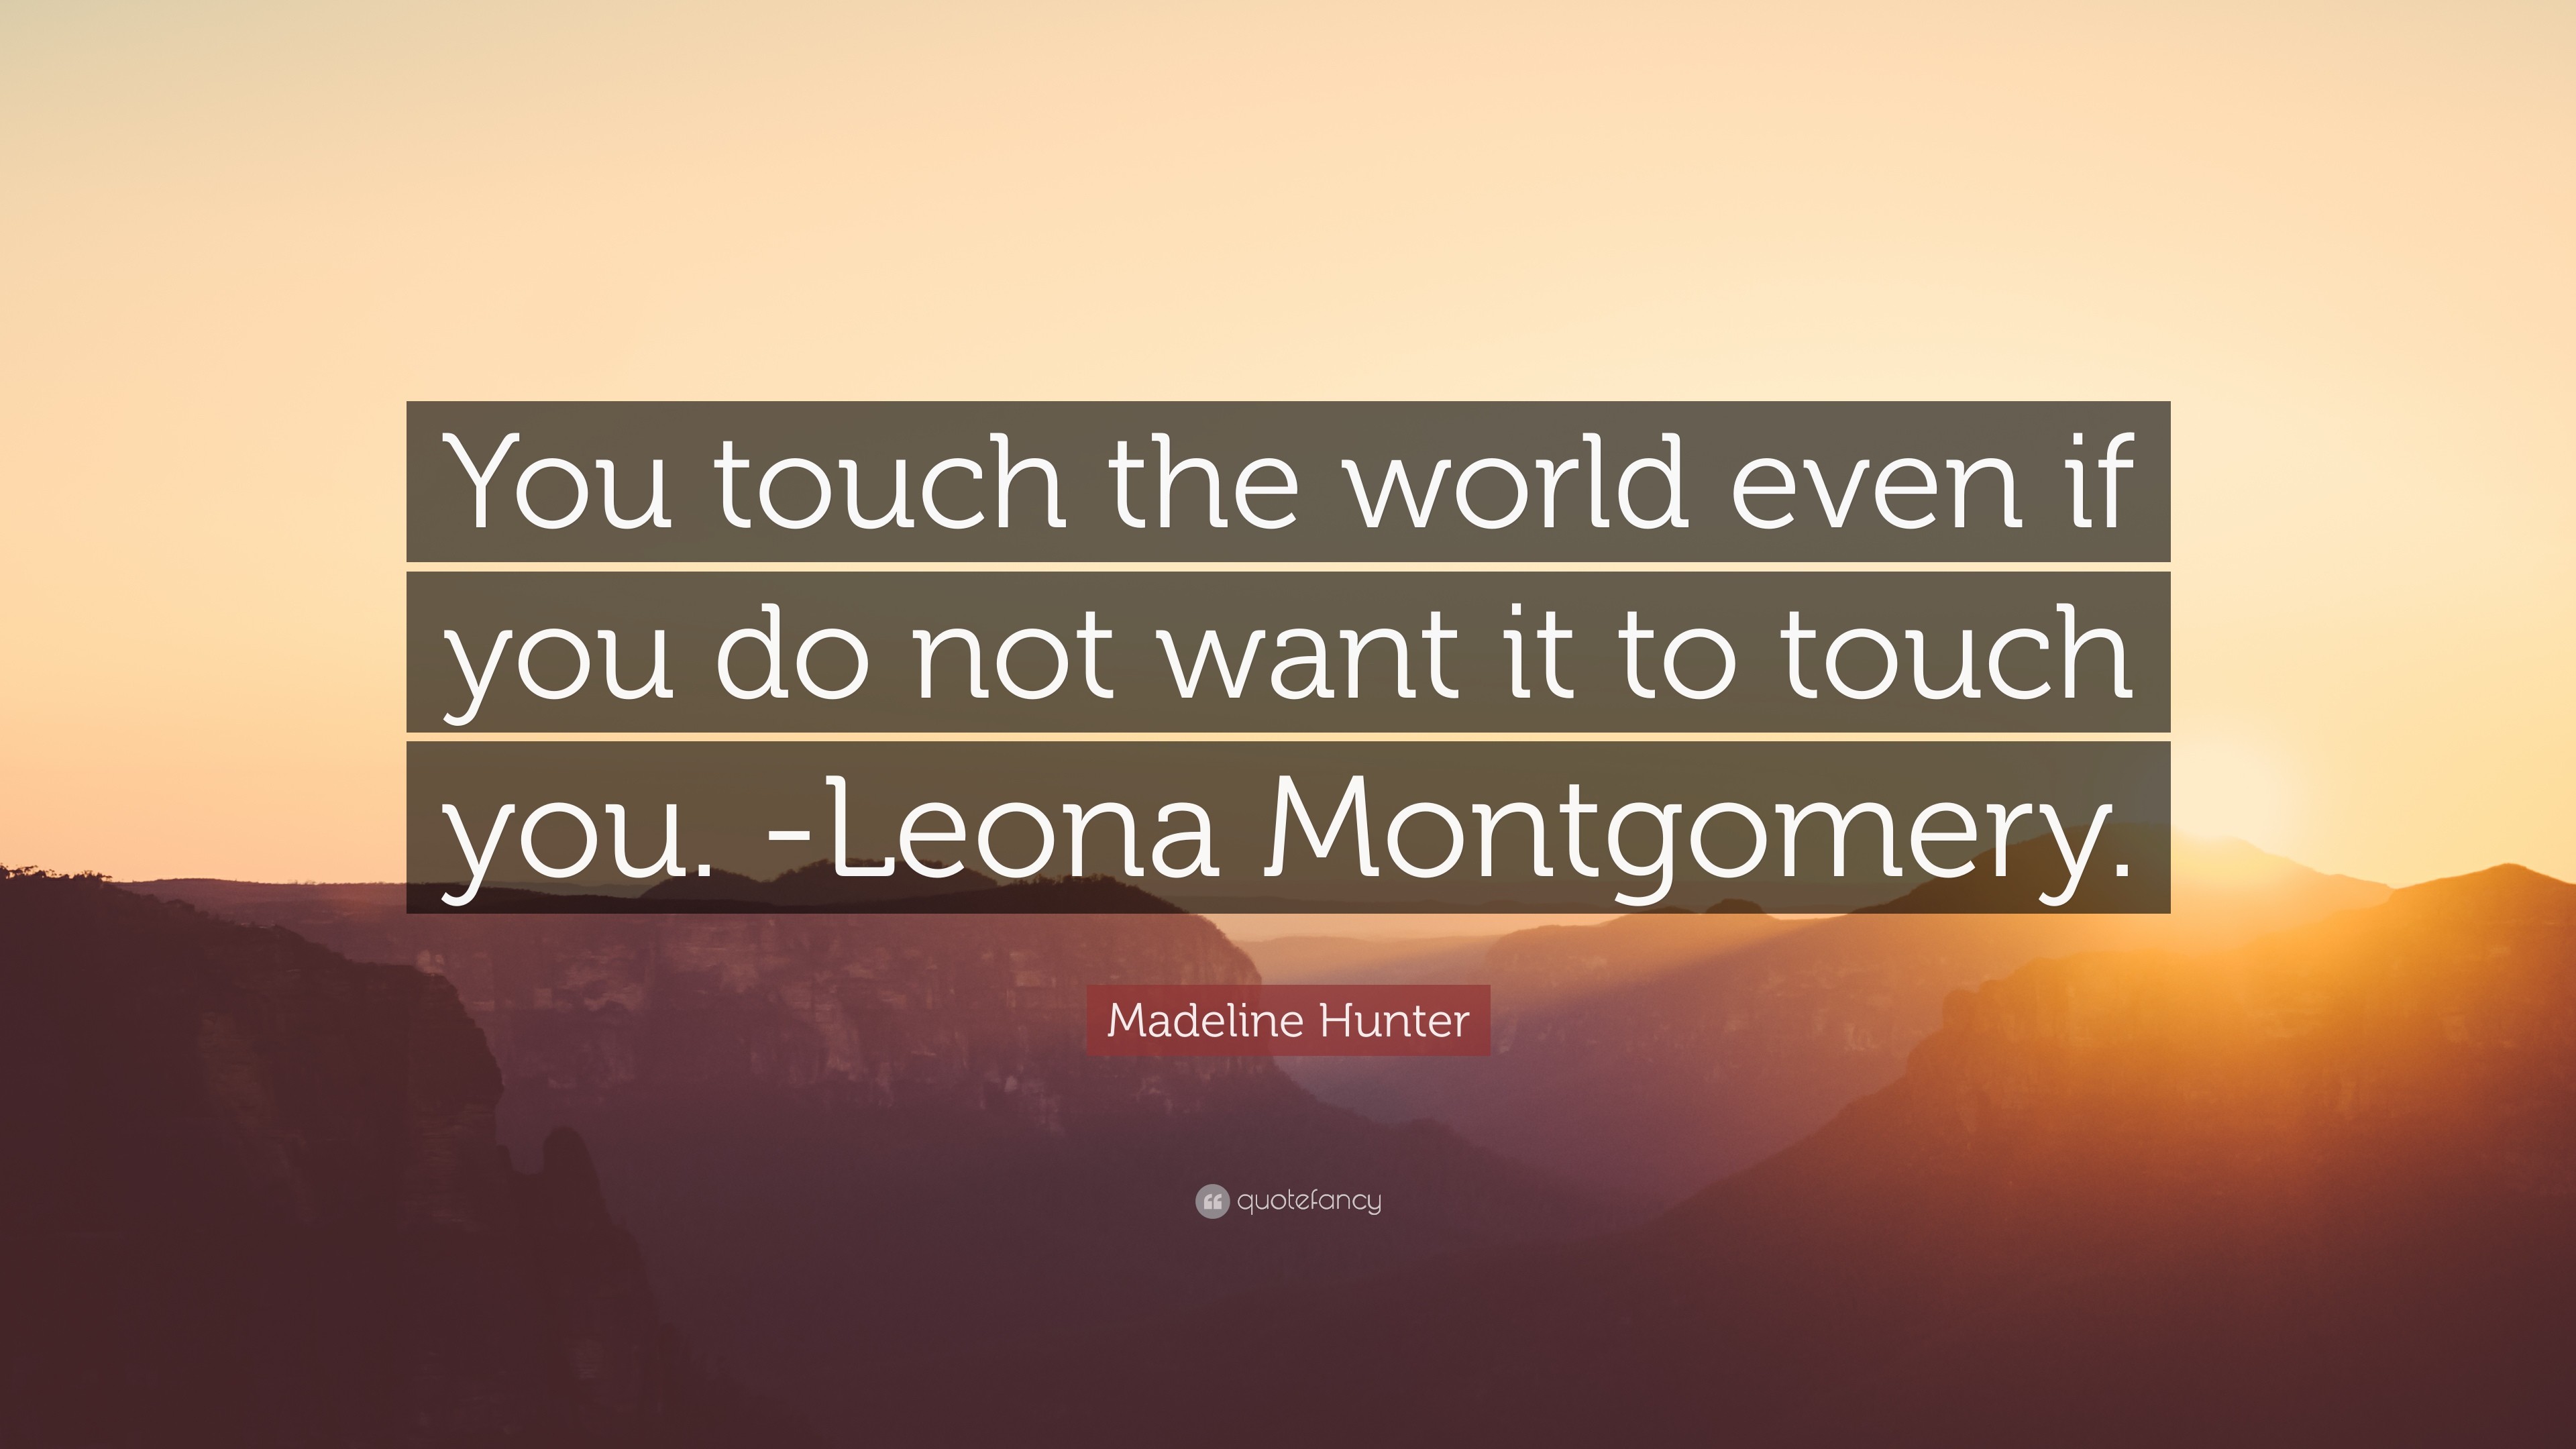 3840x2160 Madeline Hunter Quote: “You touch the world even if you do not want it